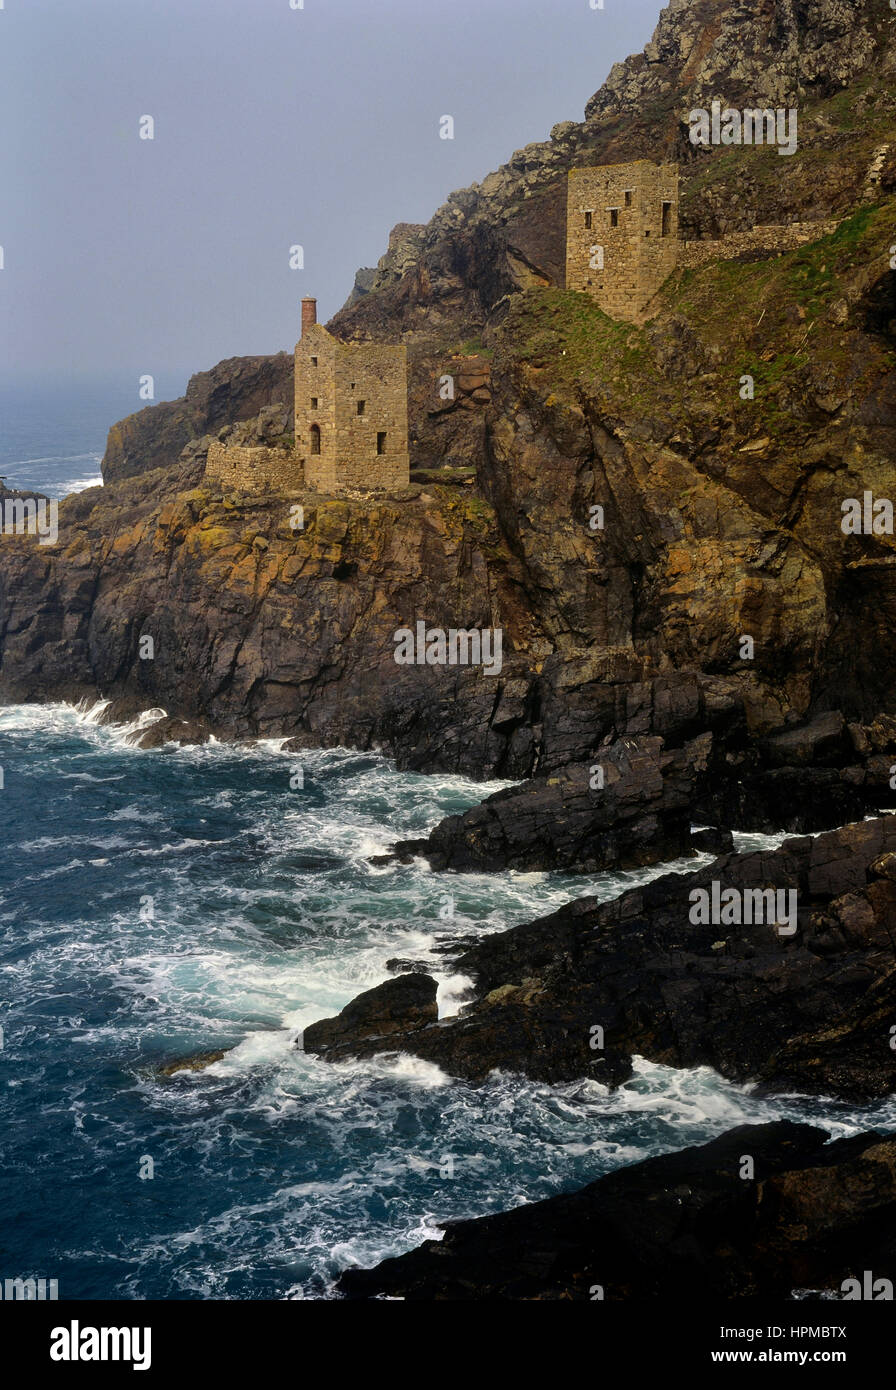 The Crowns Engine Houses at Botallack near St Just. Cornwall. England. UK Stock Photo